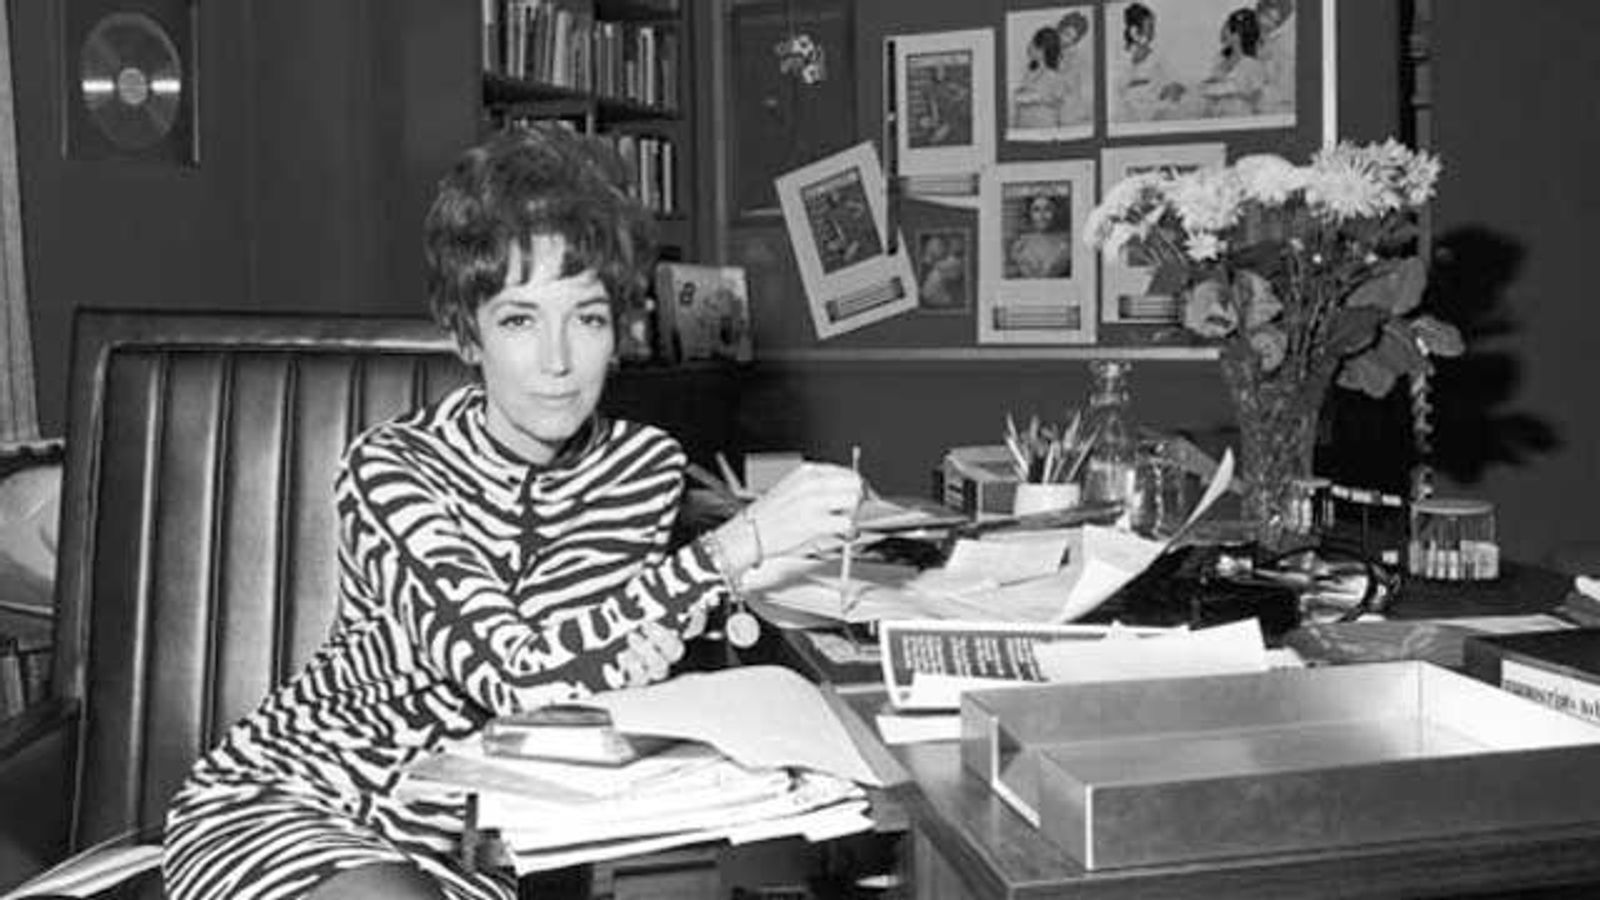 R.I.P.: Helen Gurley Brown, Author of 'Sex and the Single Girl'